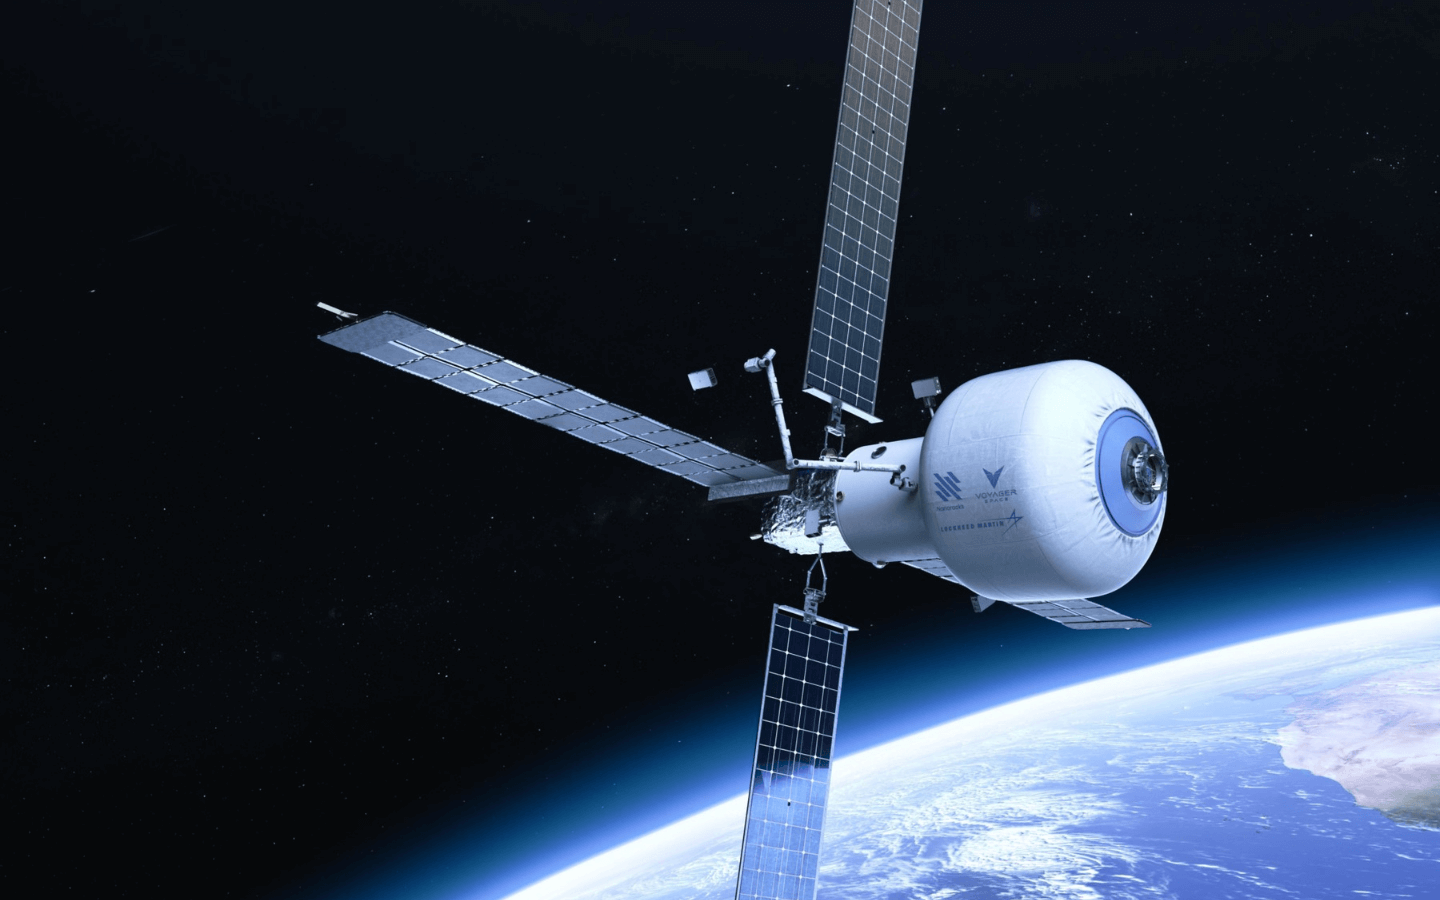 Starlab, the planned LEO (Low Earth Orbit) space station designed by Nanoracks for commercial space activities.